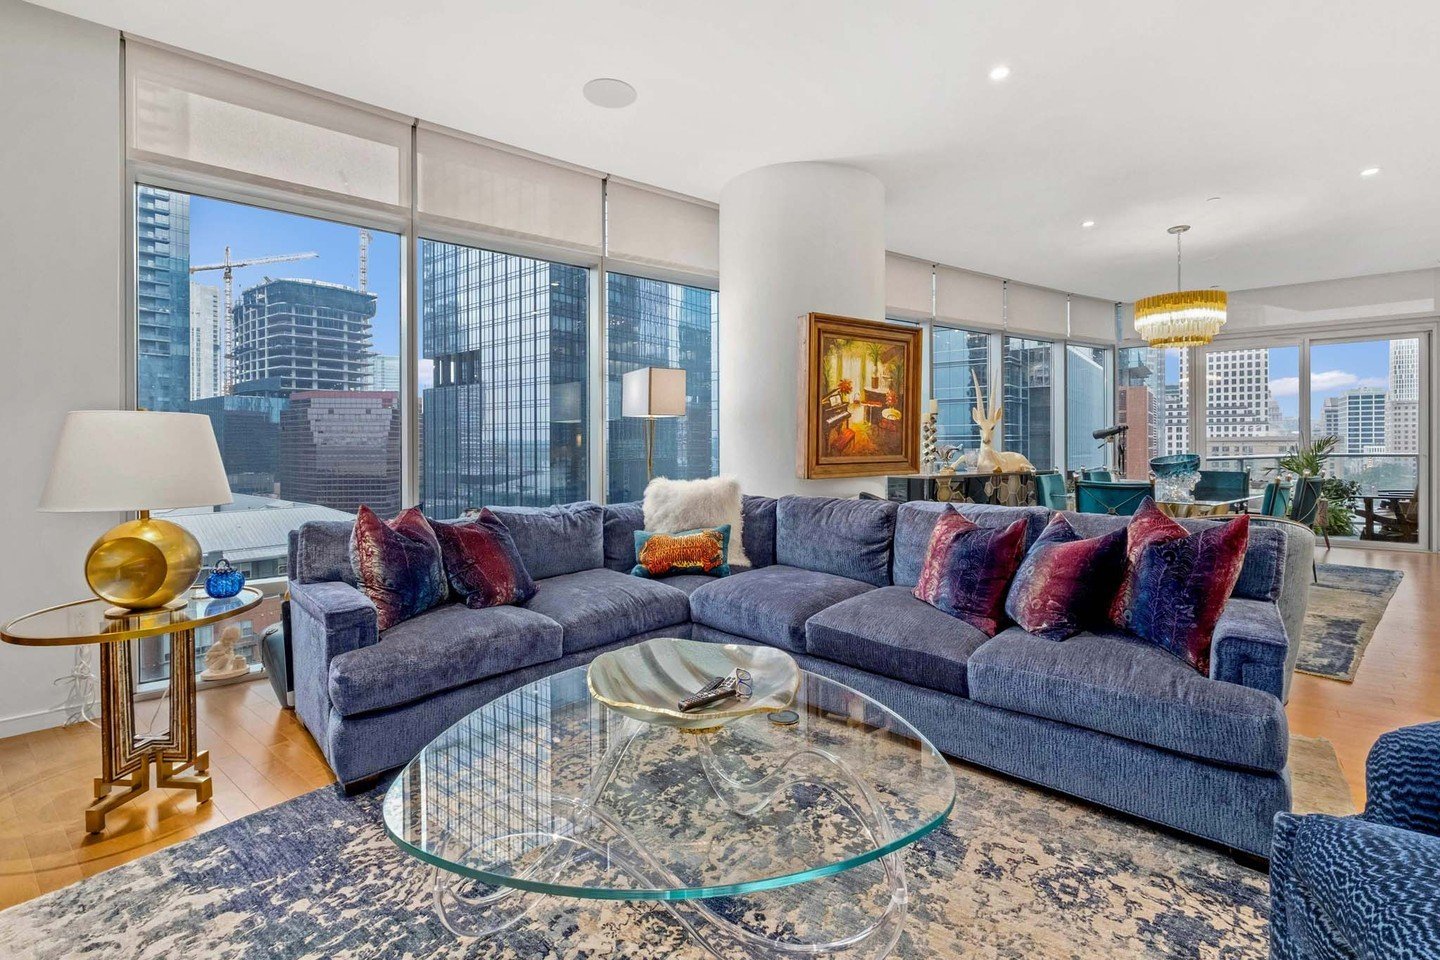 Welcome to luxury living at its finest in Unit 12E at The Austonian. Nestled in the northwest corner with Texas Capitol views, this residence boasts an inviting open floor plan flooded with natural light. Step onto your private terrace and savor brea